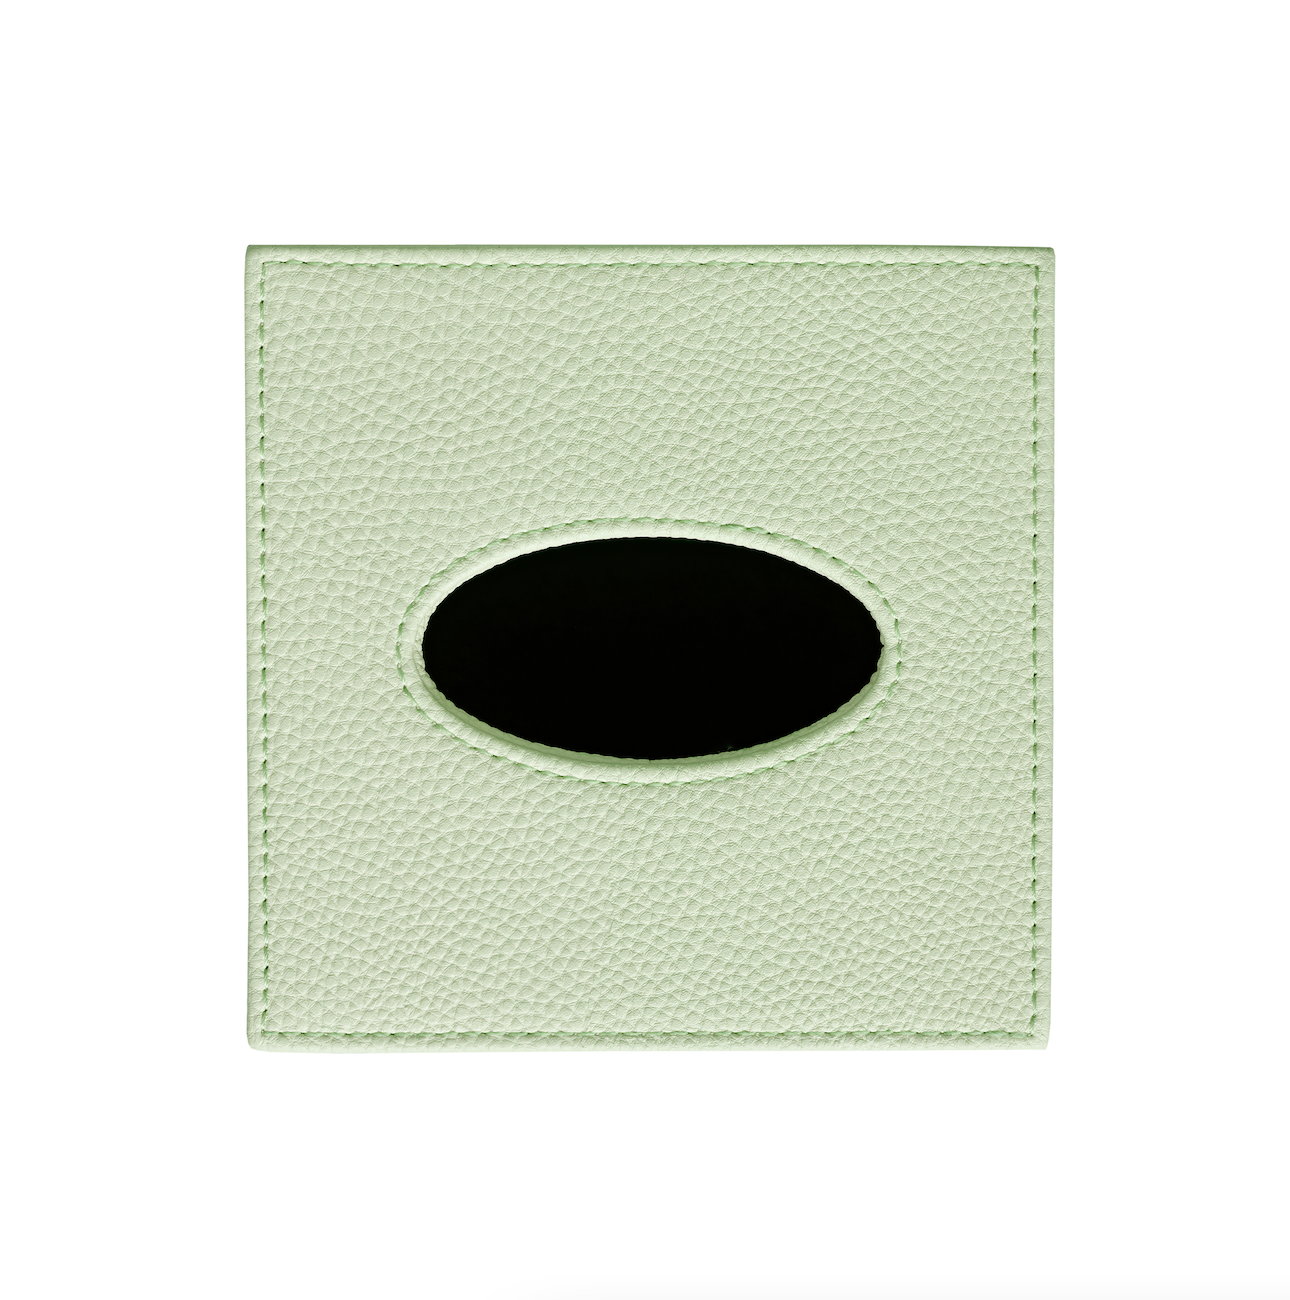 Faux Leather Tissue Box - Light Green